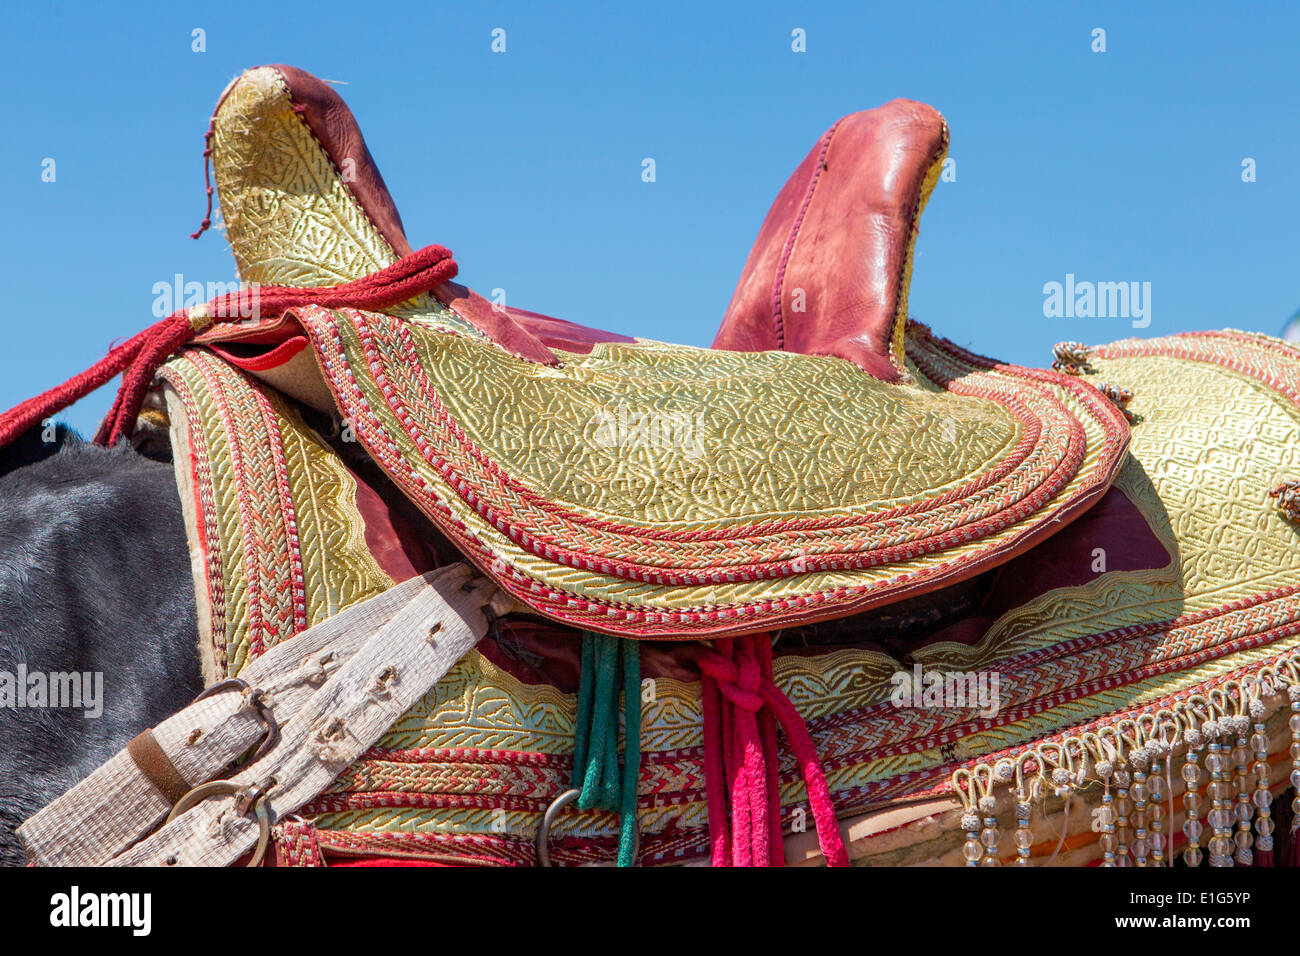 Detail of traditionally decorated Arabian Barb horses performing at a fantasia near Rabat in Morocco. Stock Photo